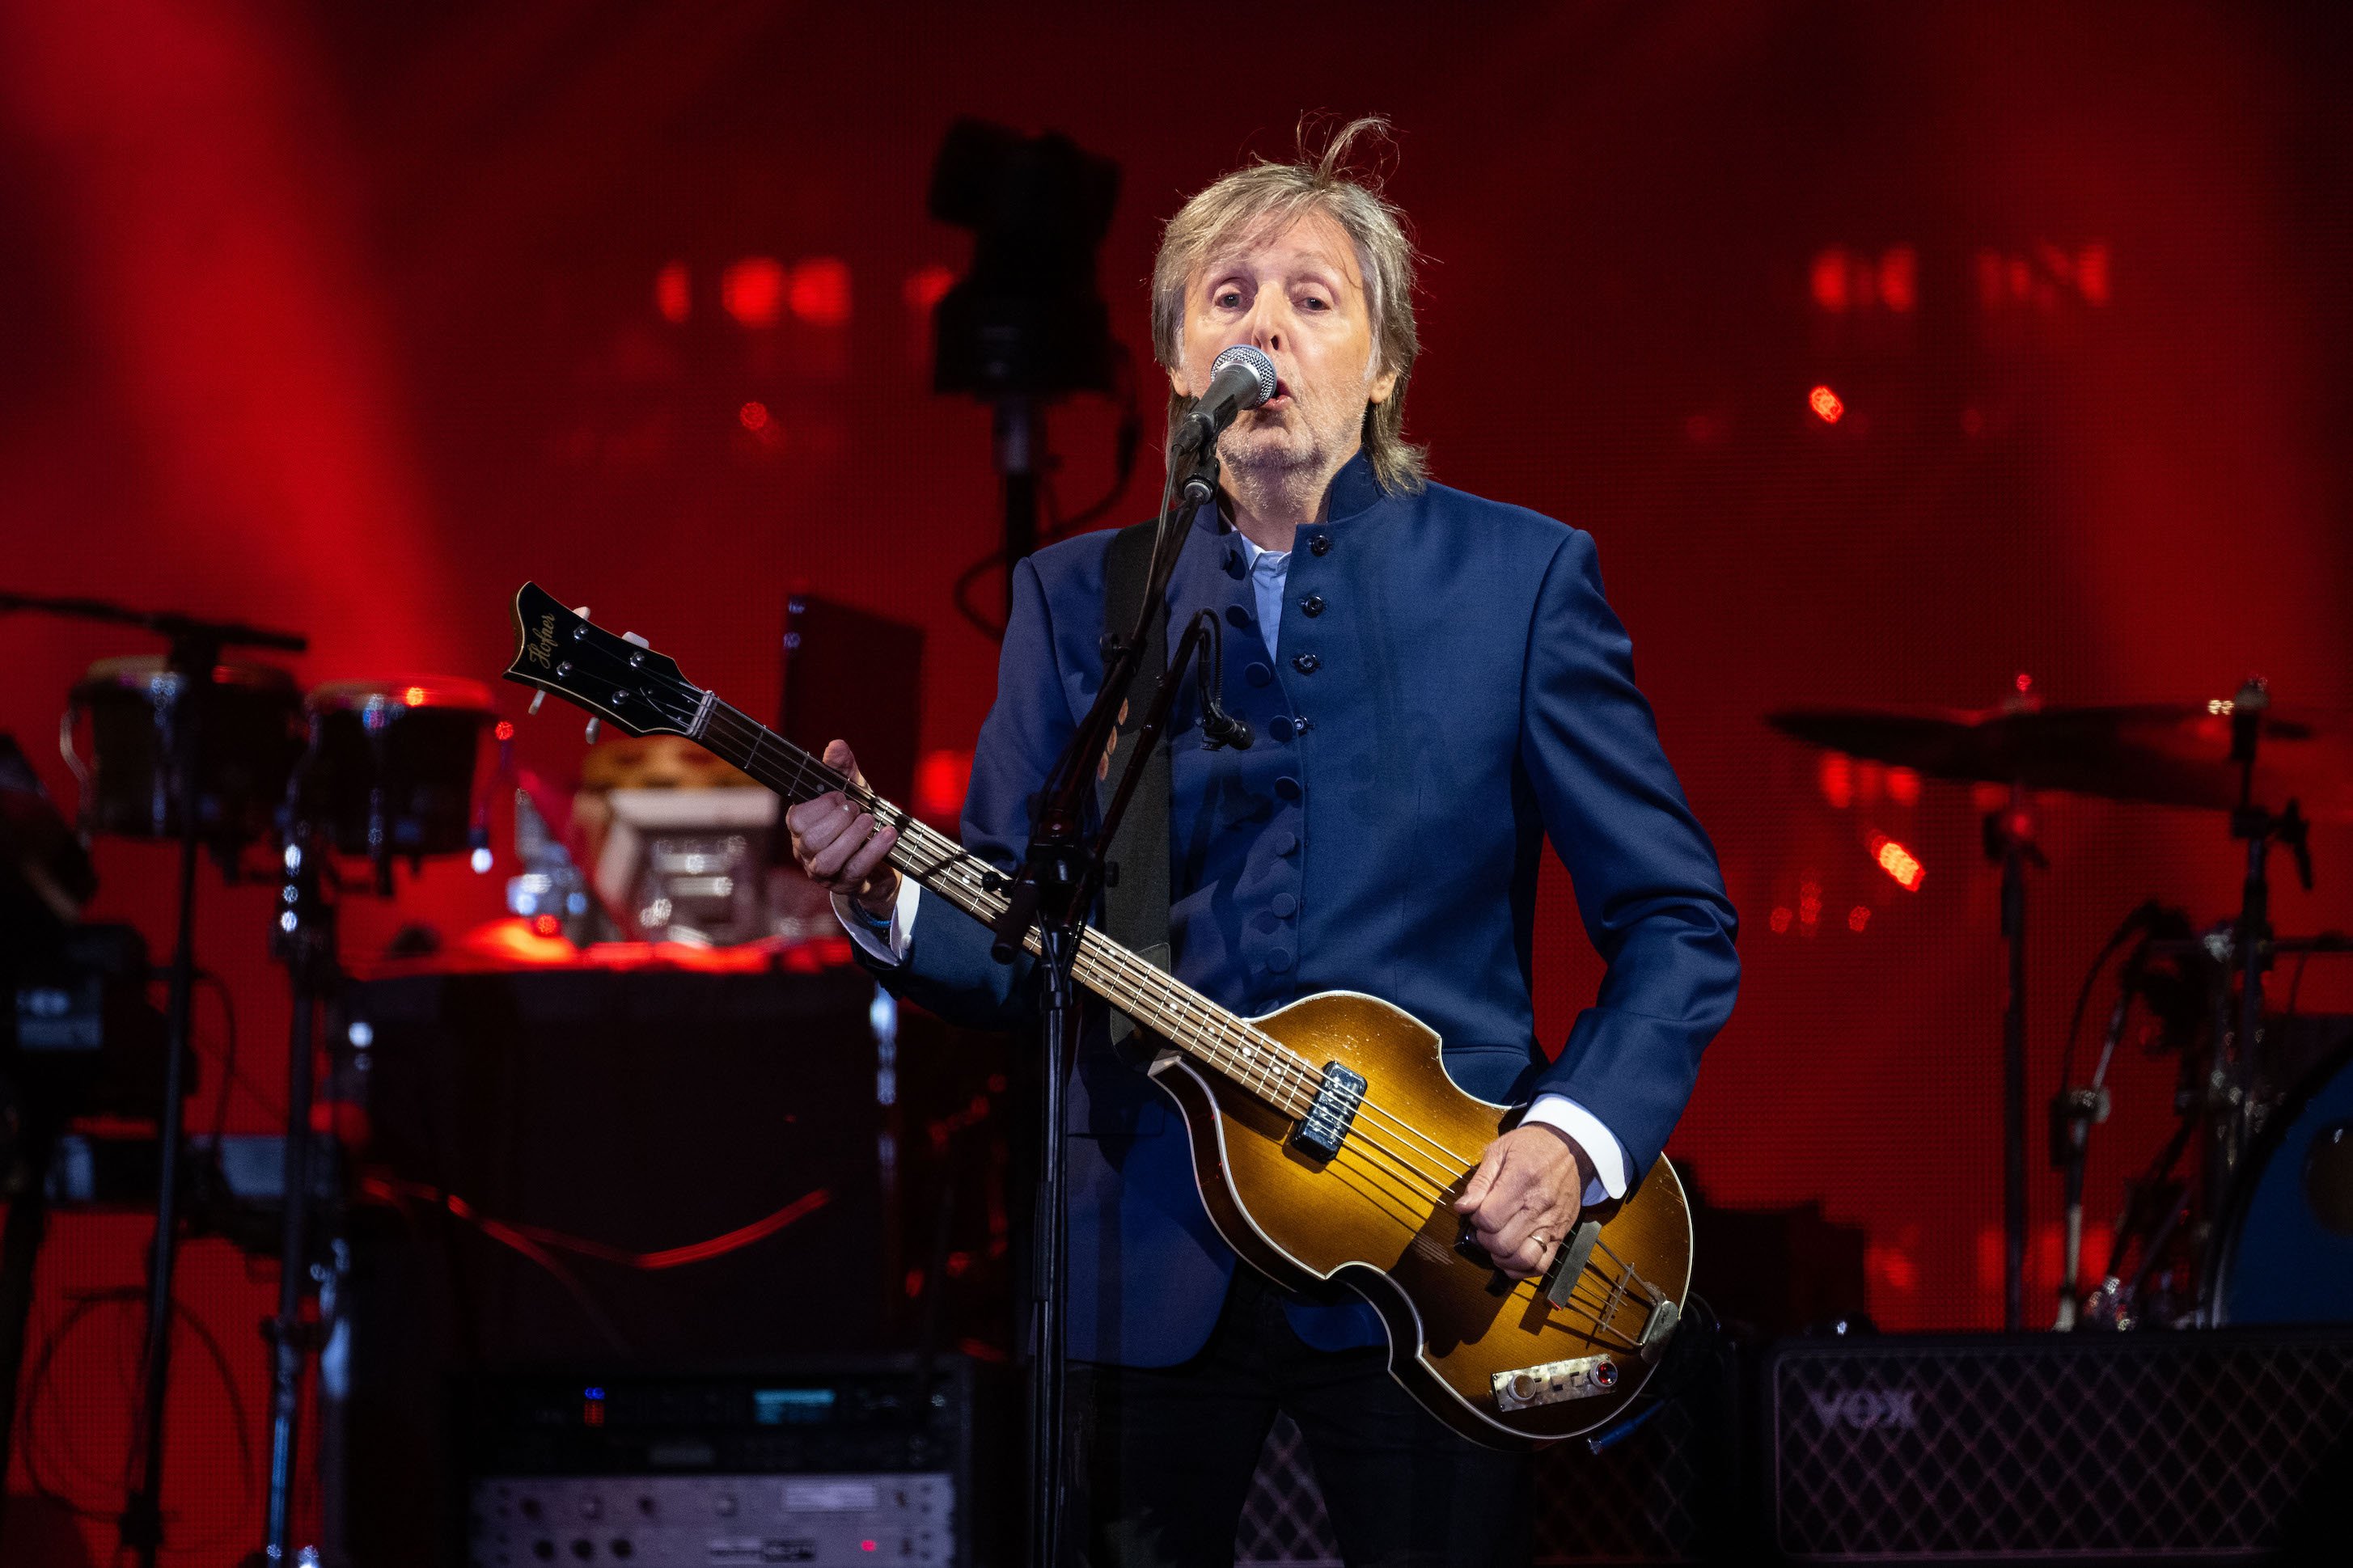 Paul McCartney performs at day four of the Glastonbury Festival